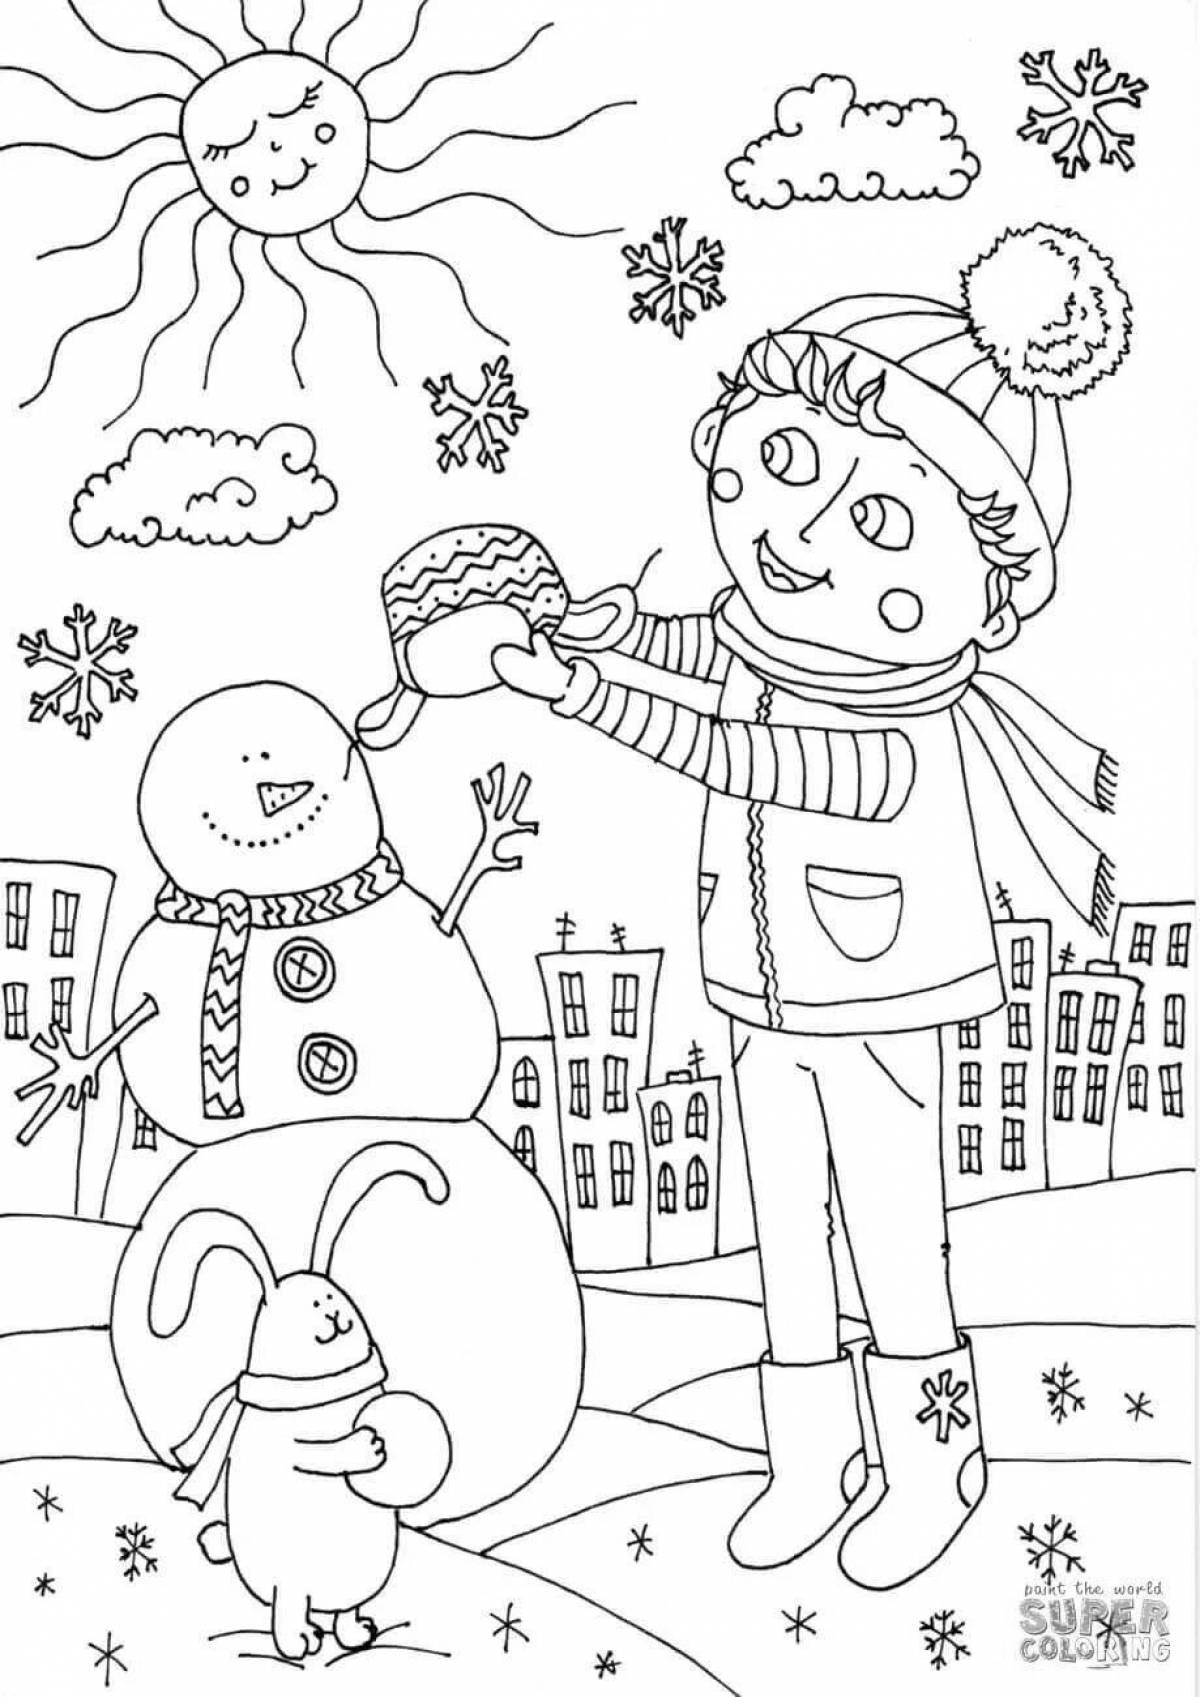 Exquisite winter months coloring book